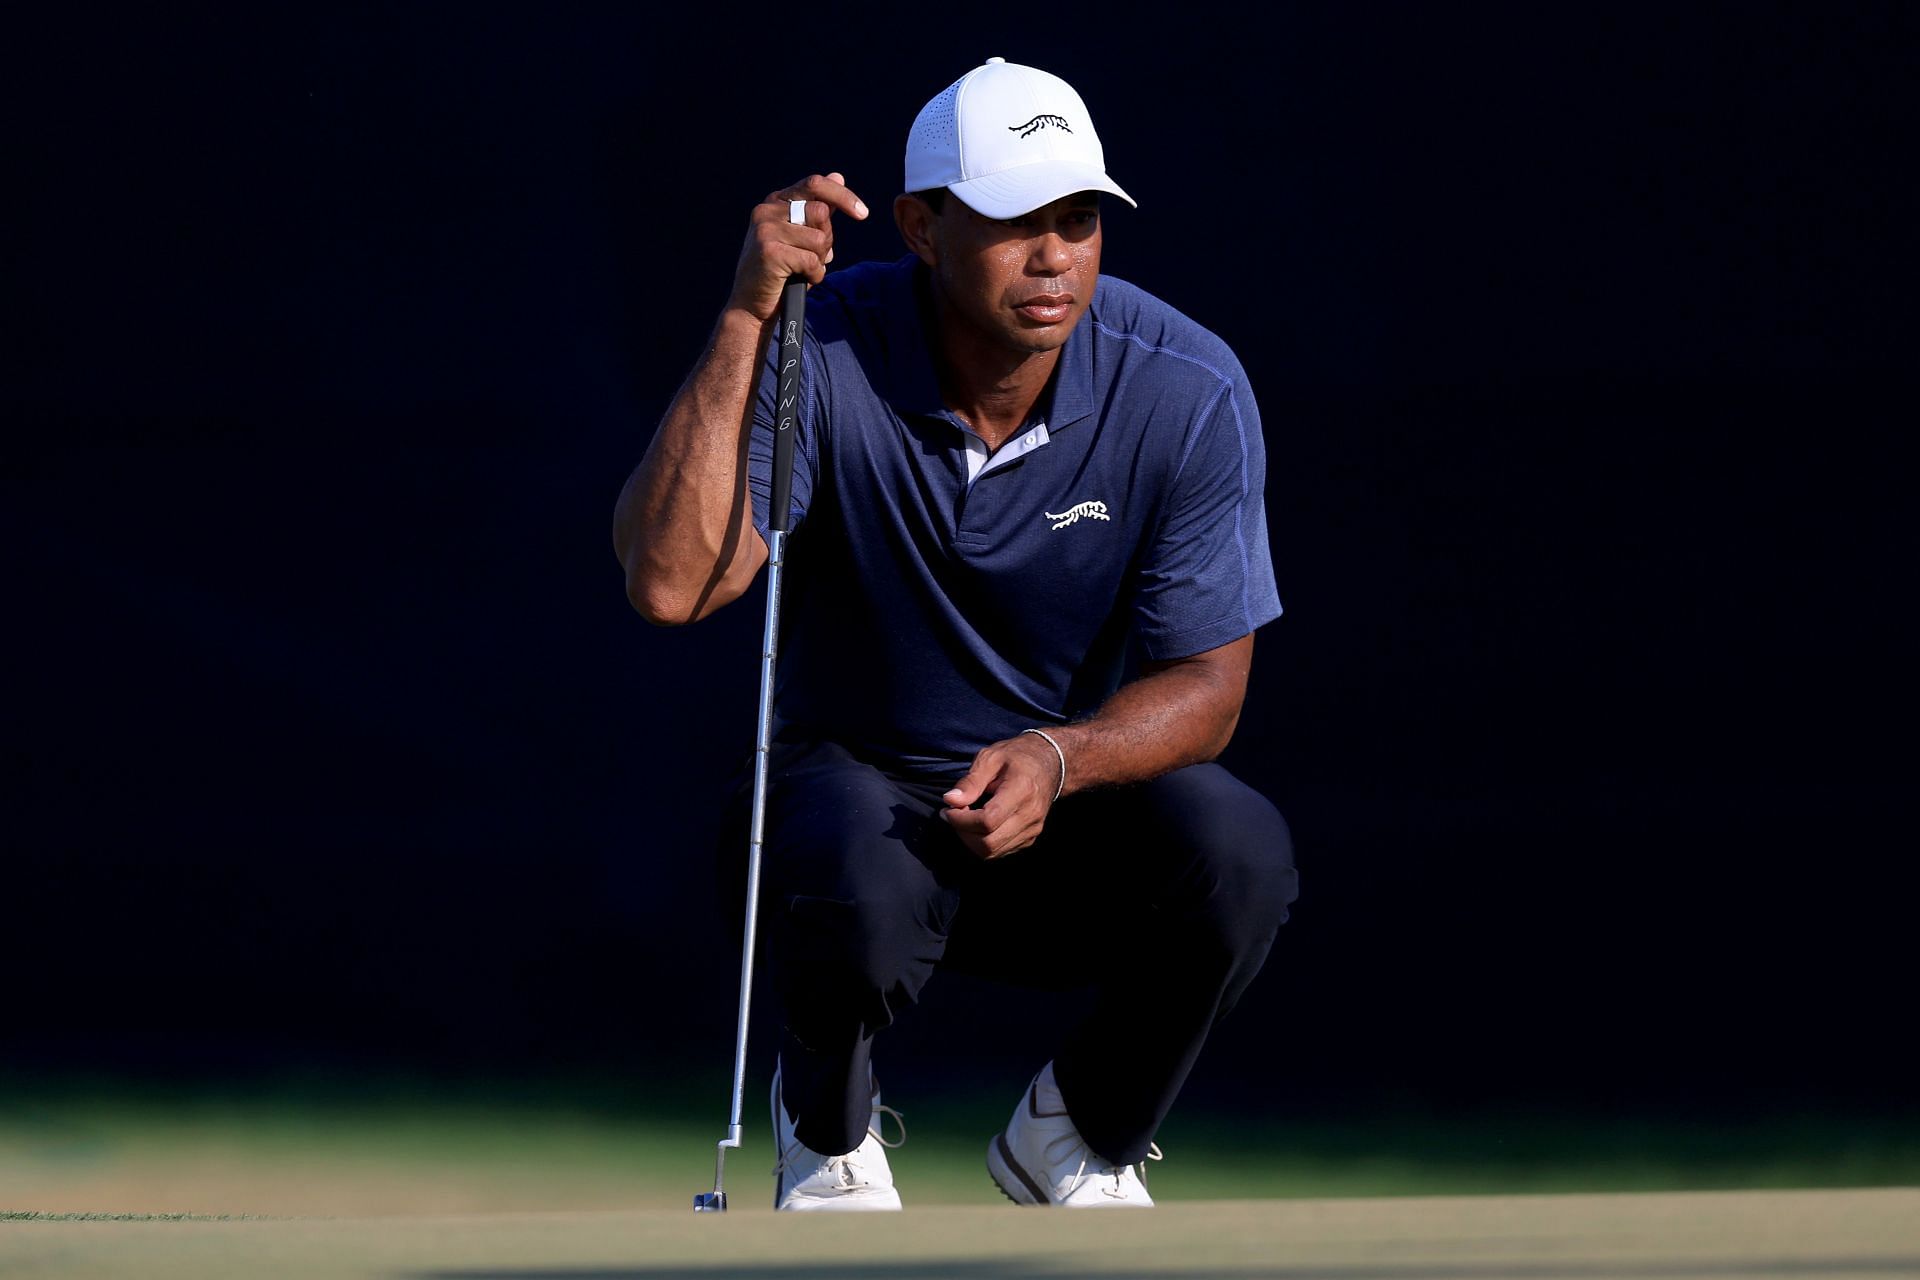 Tiger Woods has one more tournament left